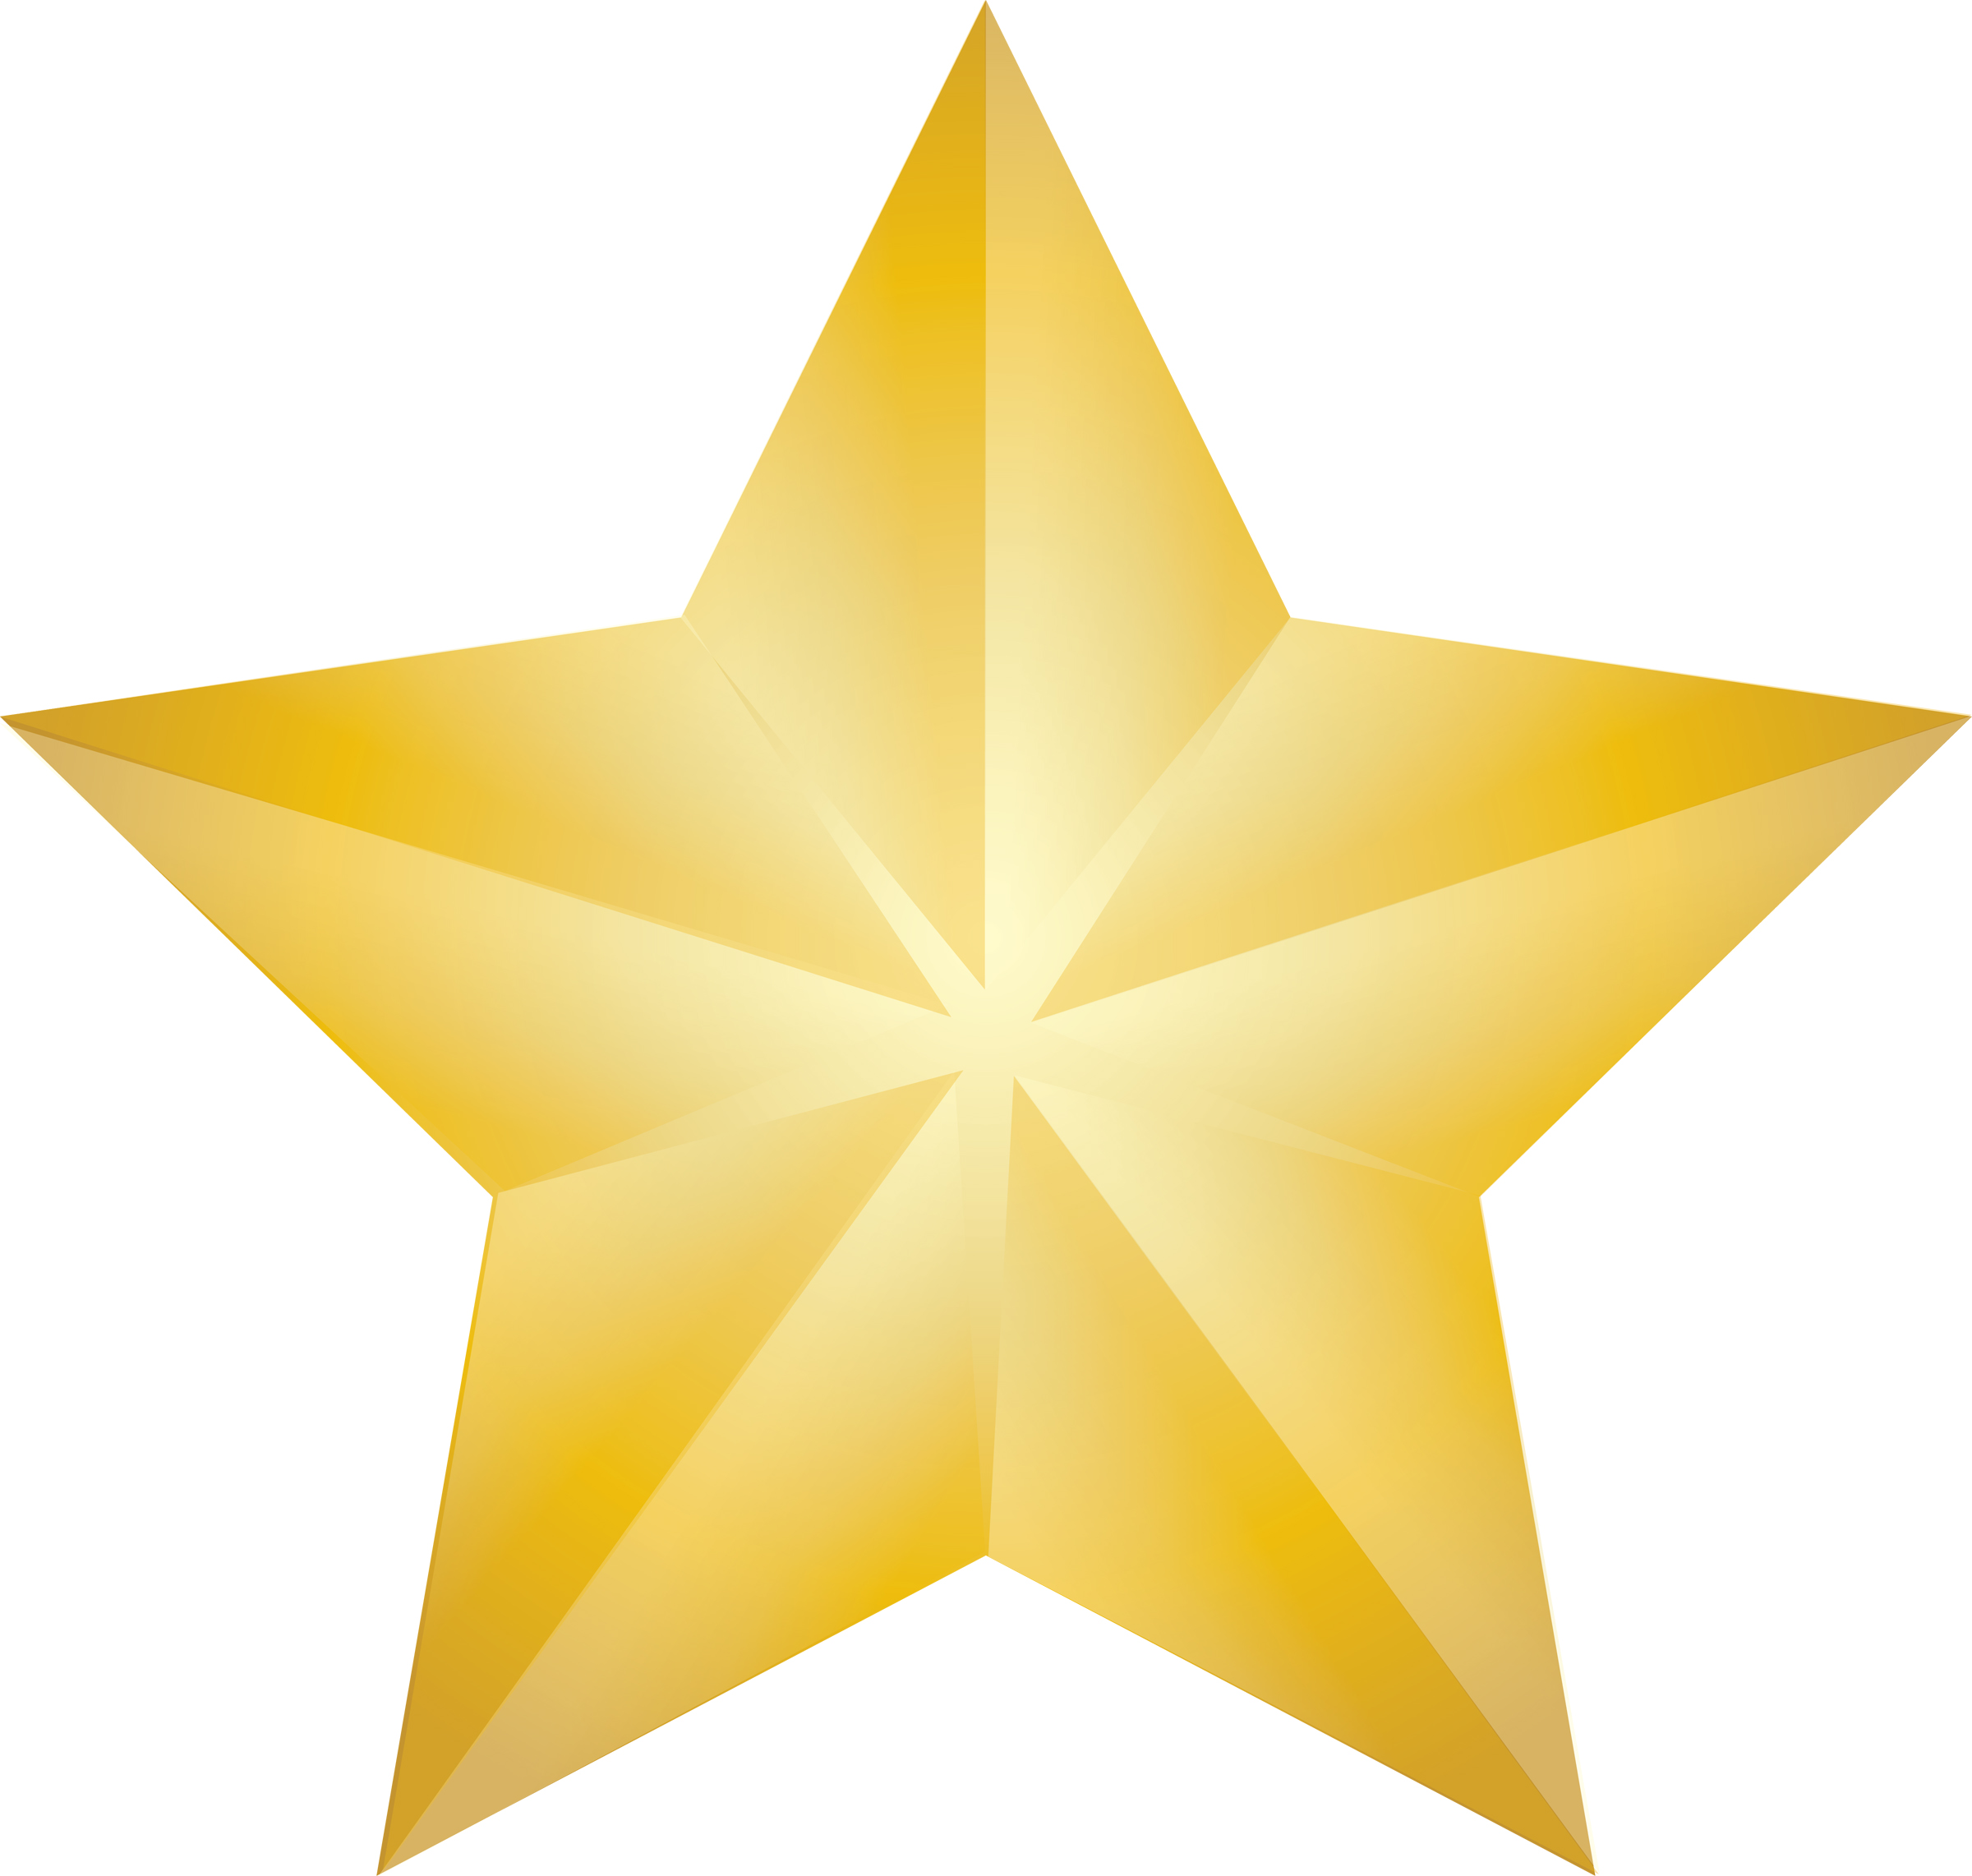 Gold Star Image Free Download Clip Art Free Clip Art On 